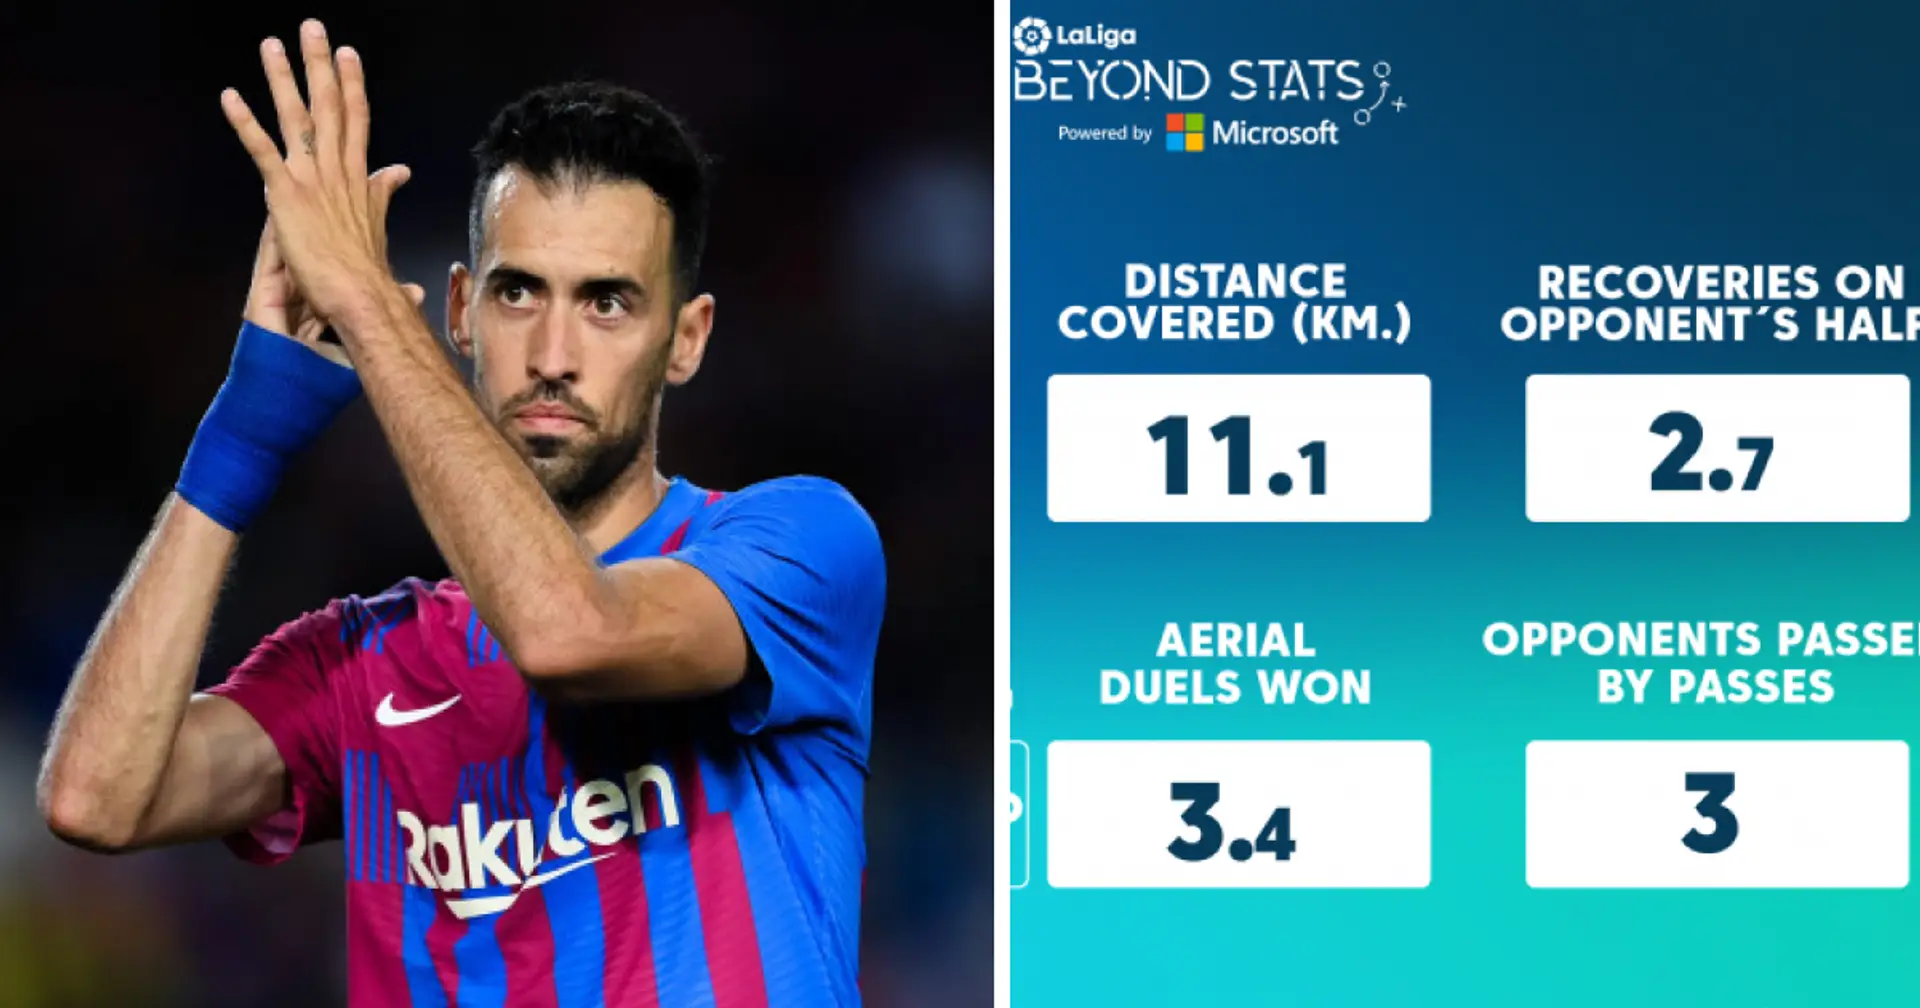 Top 3 players who covered the most distance in La Liga last season - Busquets 1st